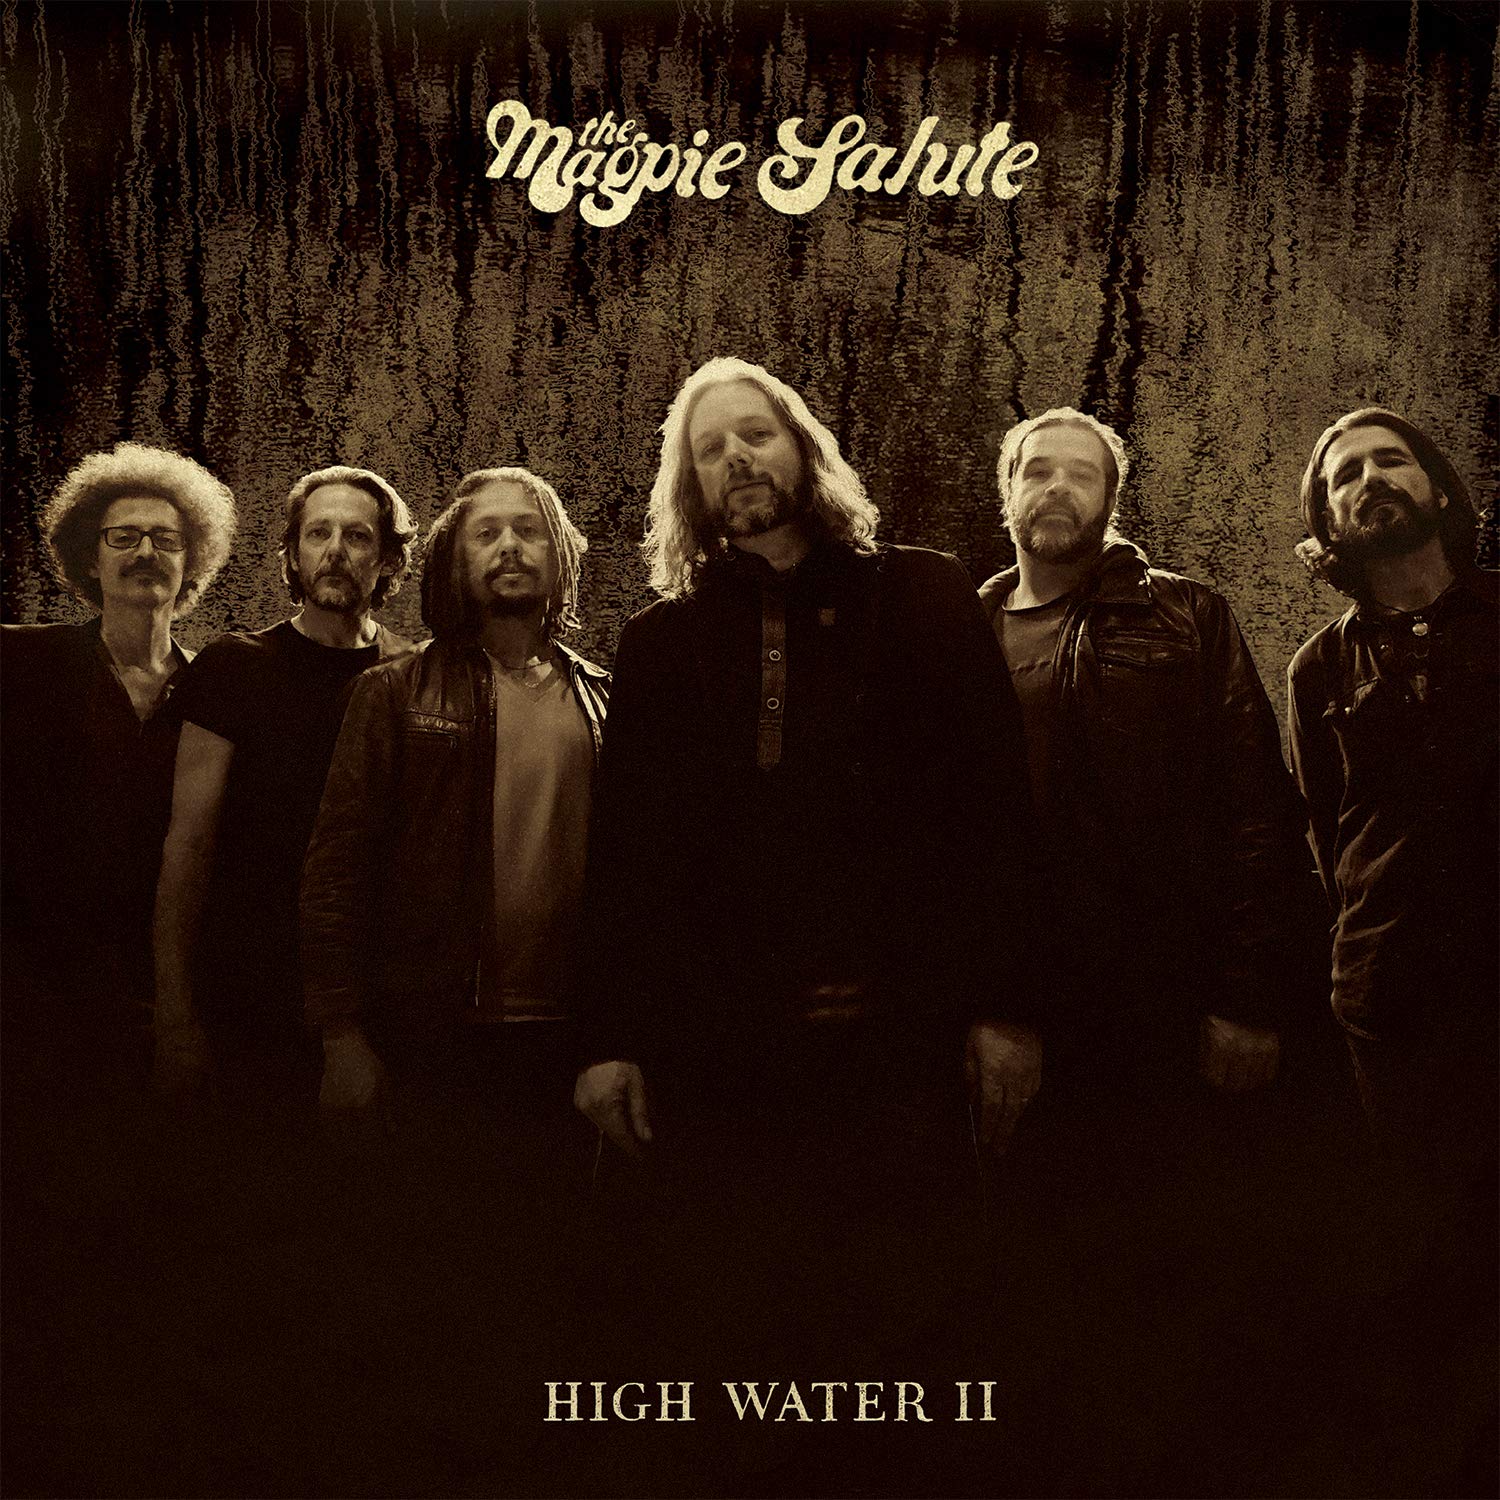 The Magpie Salute-High Water II-CD-FLAC-2019-401 Download